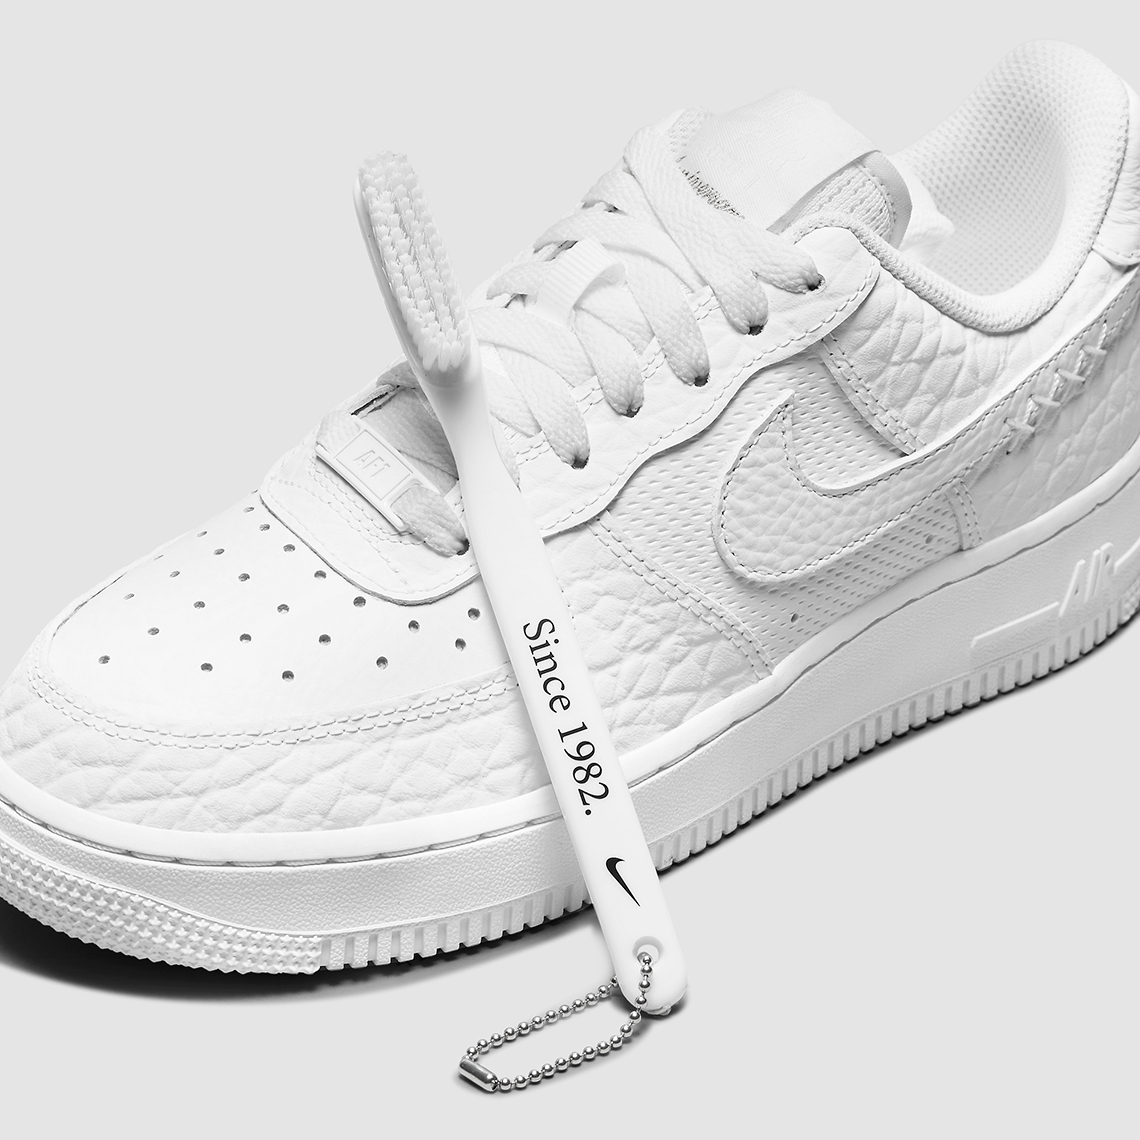 nike air force 1 low color of the month DZ4711 100 1